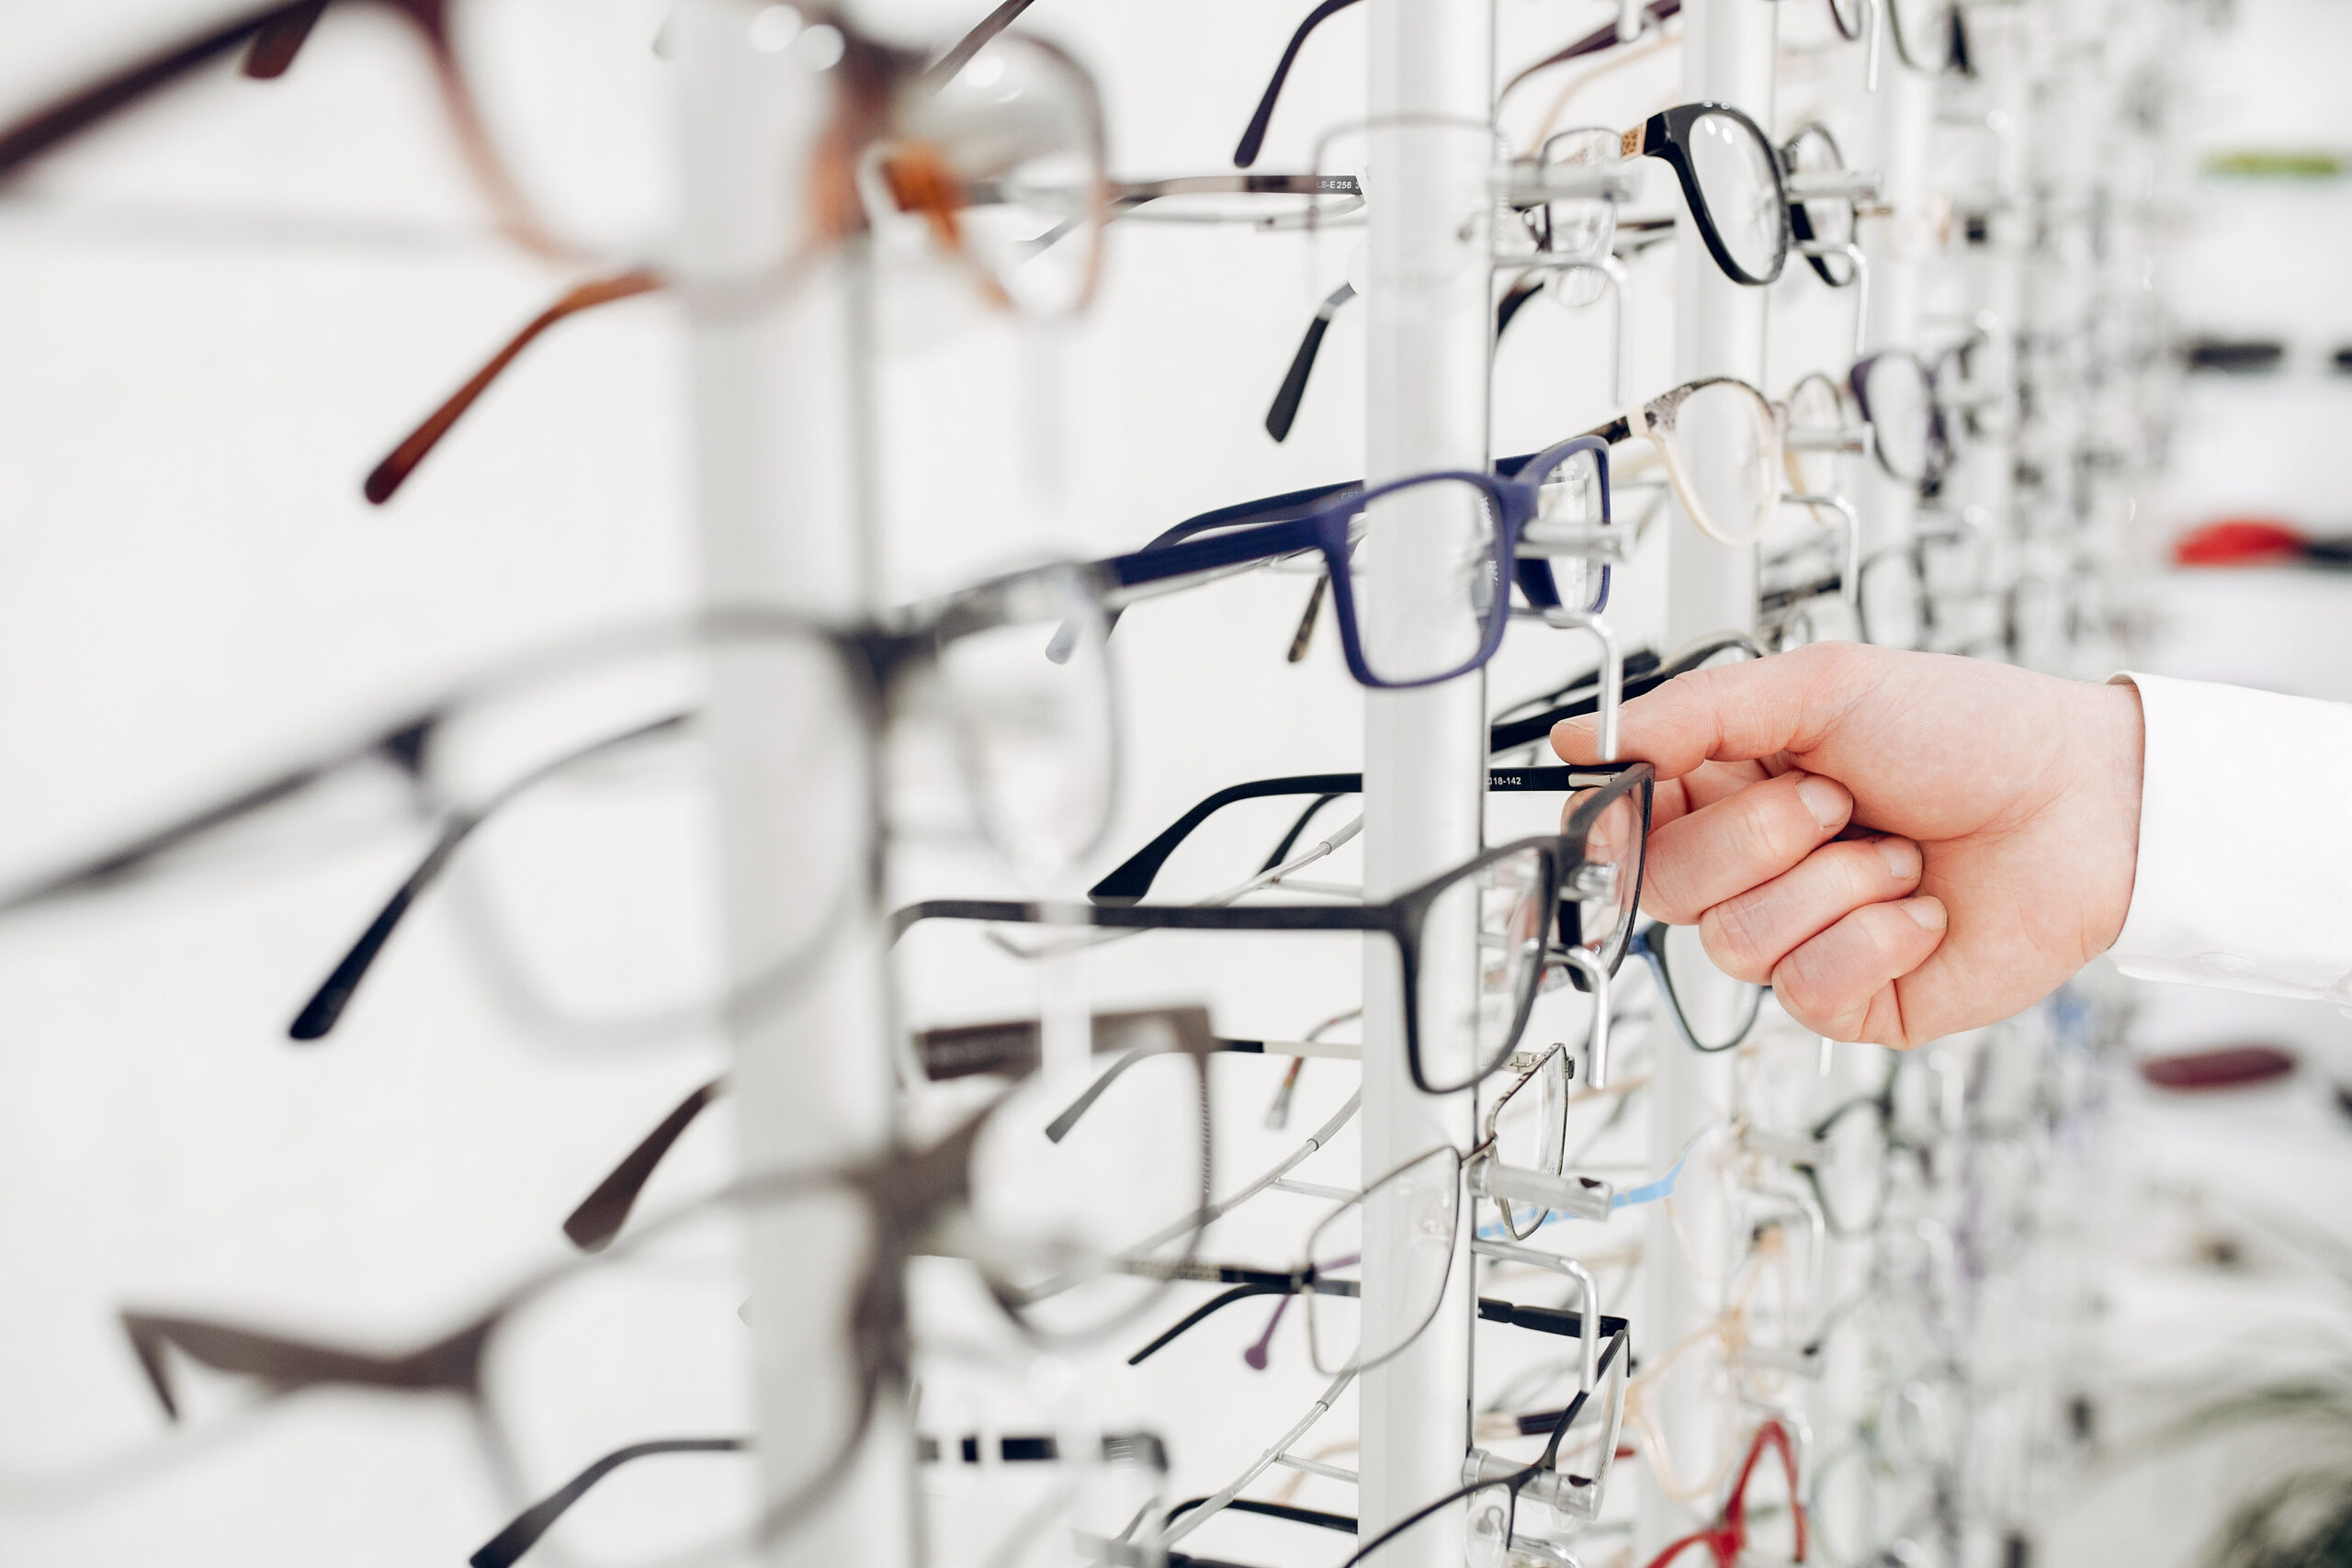 What's The Difference Between Standard Fit And Asian Fit Eyeglasses?What's The Difference Between Standard Fit And Asian Fit Eyeglasses?